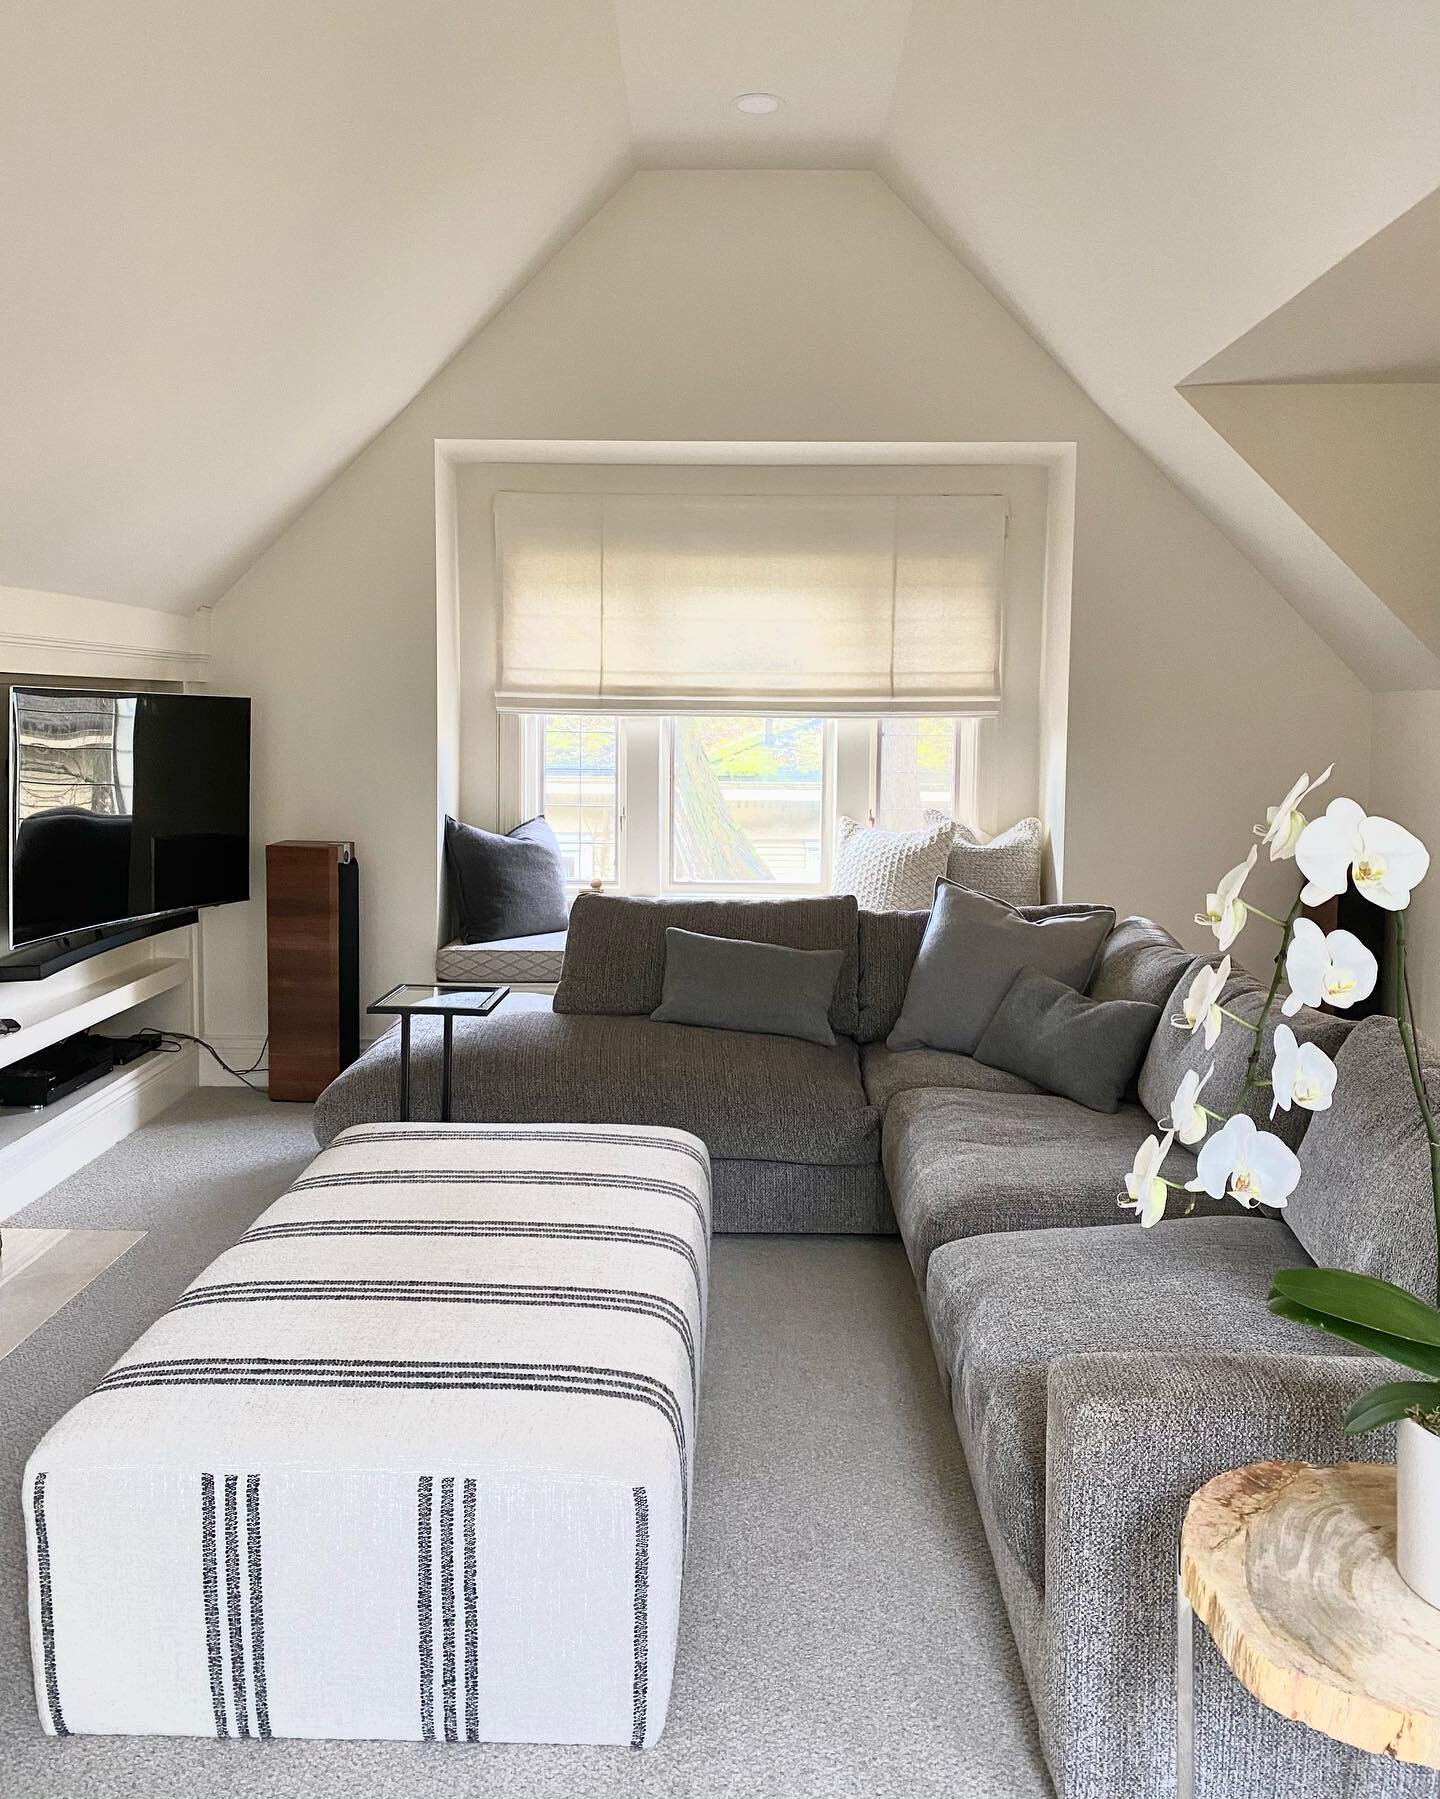 A luxe Netflix lounge. 
Beyond window coverings, we also design and create custom furnishings, pillows and bench cushions. Contact us to reimagine your space. 

#wilsondressedwindows 
#vancouverwindowcoverings
#vancouverupholstery
#linen
#kravet
#rom